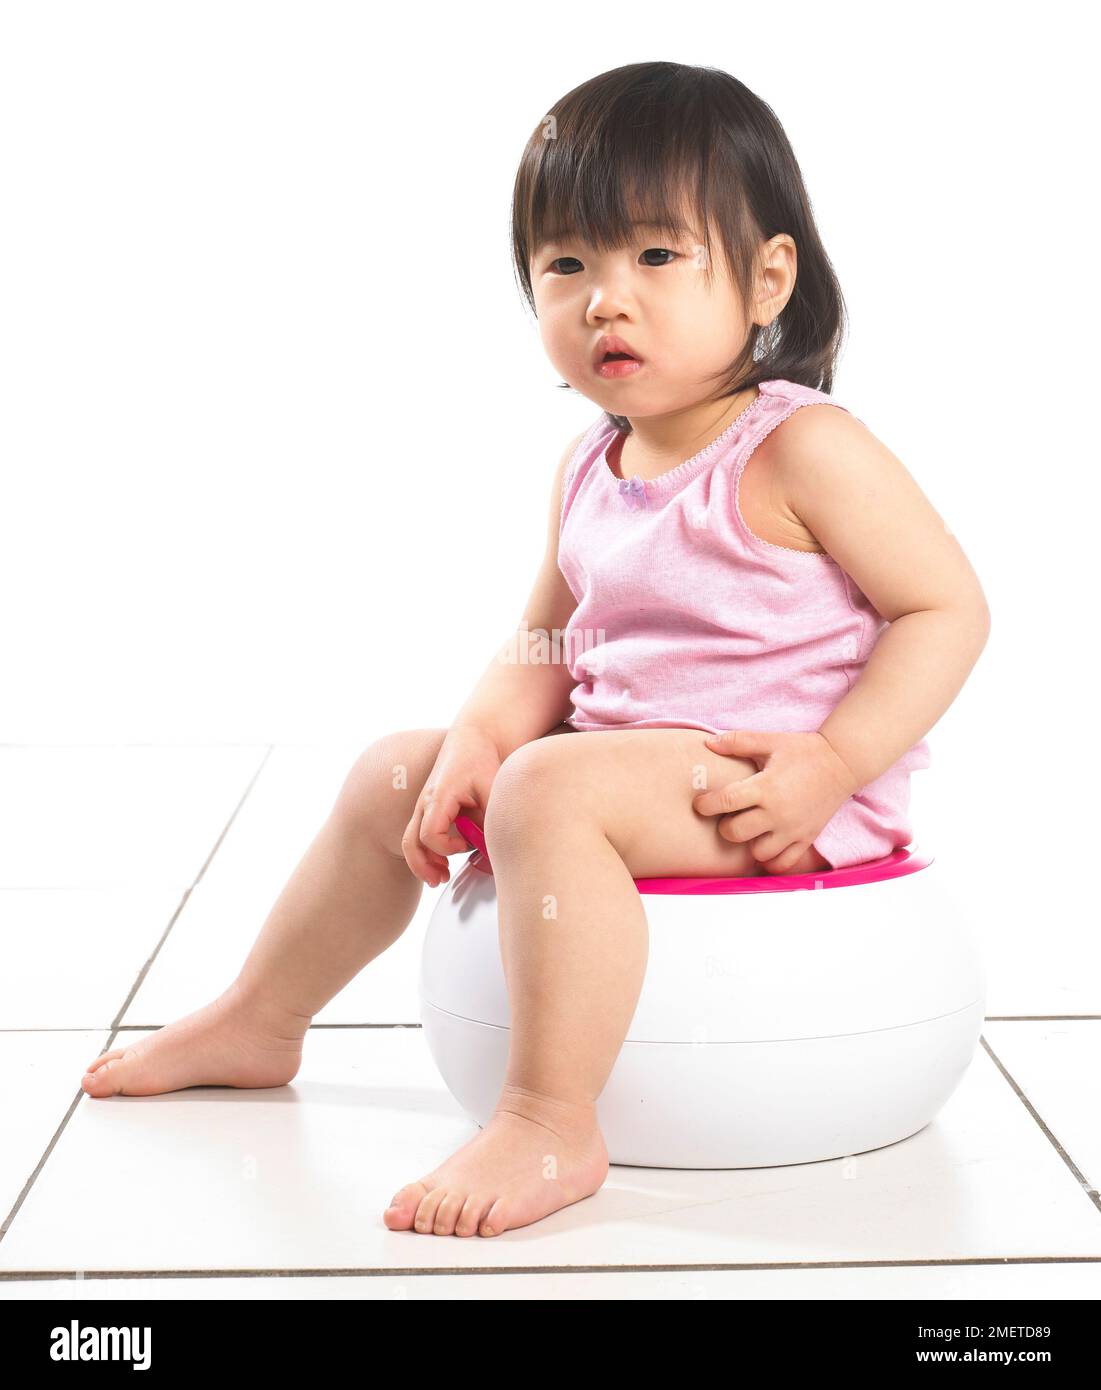 Girl wearing pink vest sitting on a white potty, 20 months Stock Photo ...